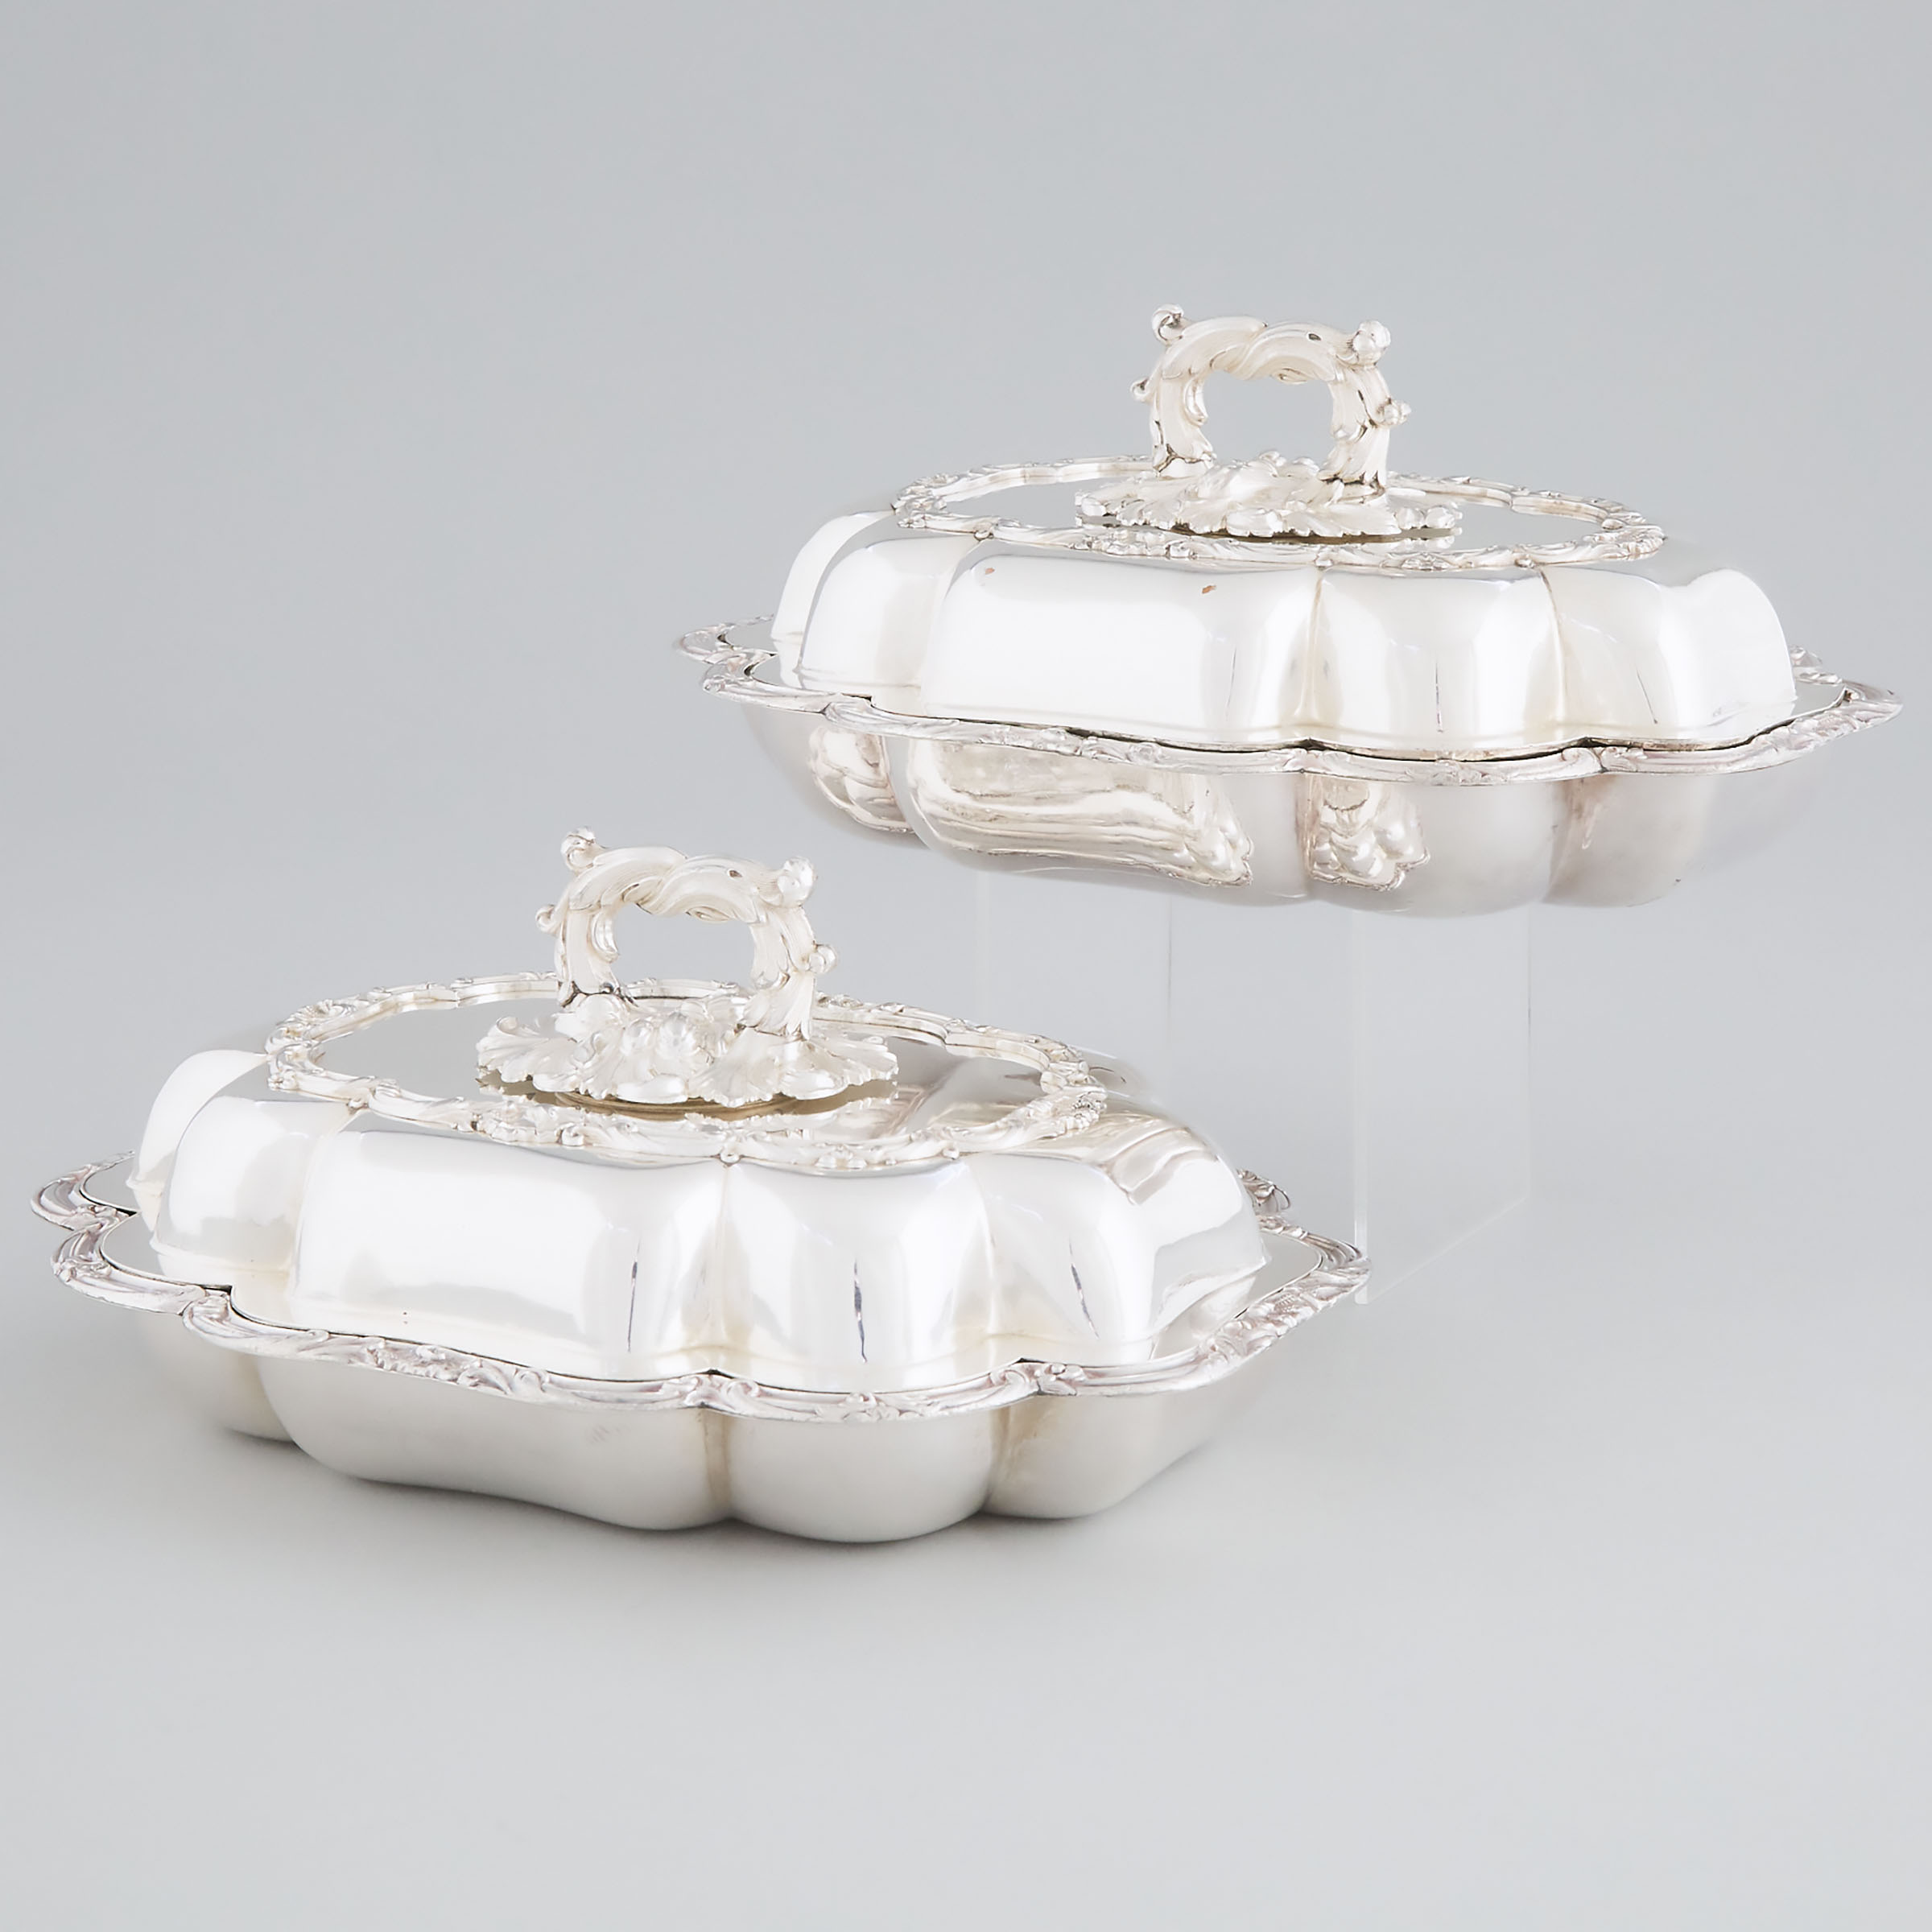 Pair of Old Sheffield Plate Covered Entrée Dishes, Henry Wilkinson & Co., c.1835